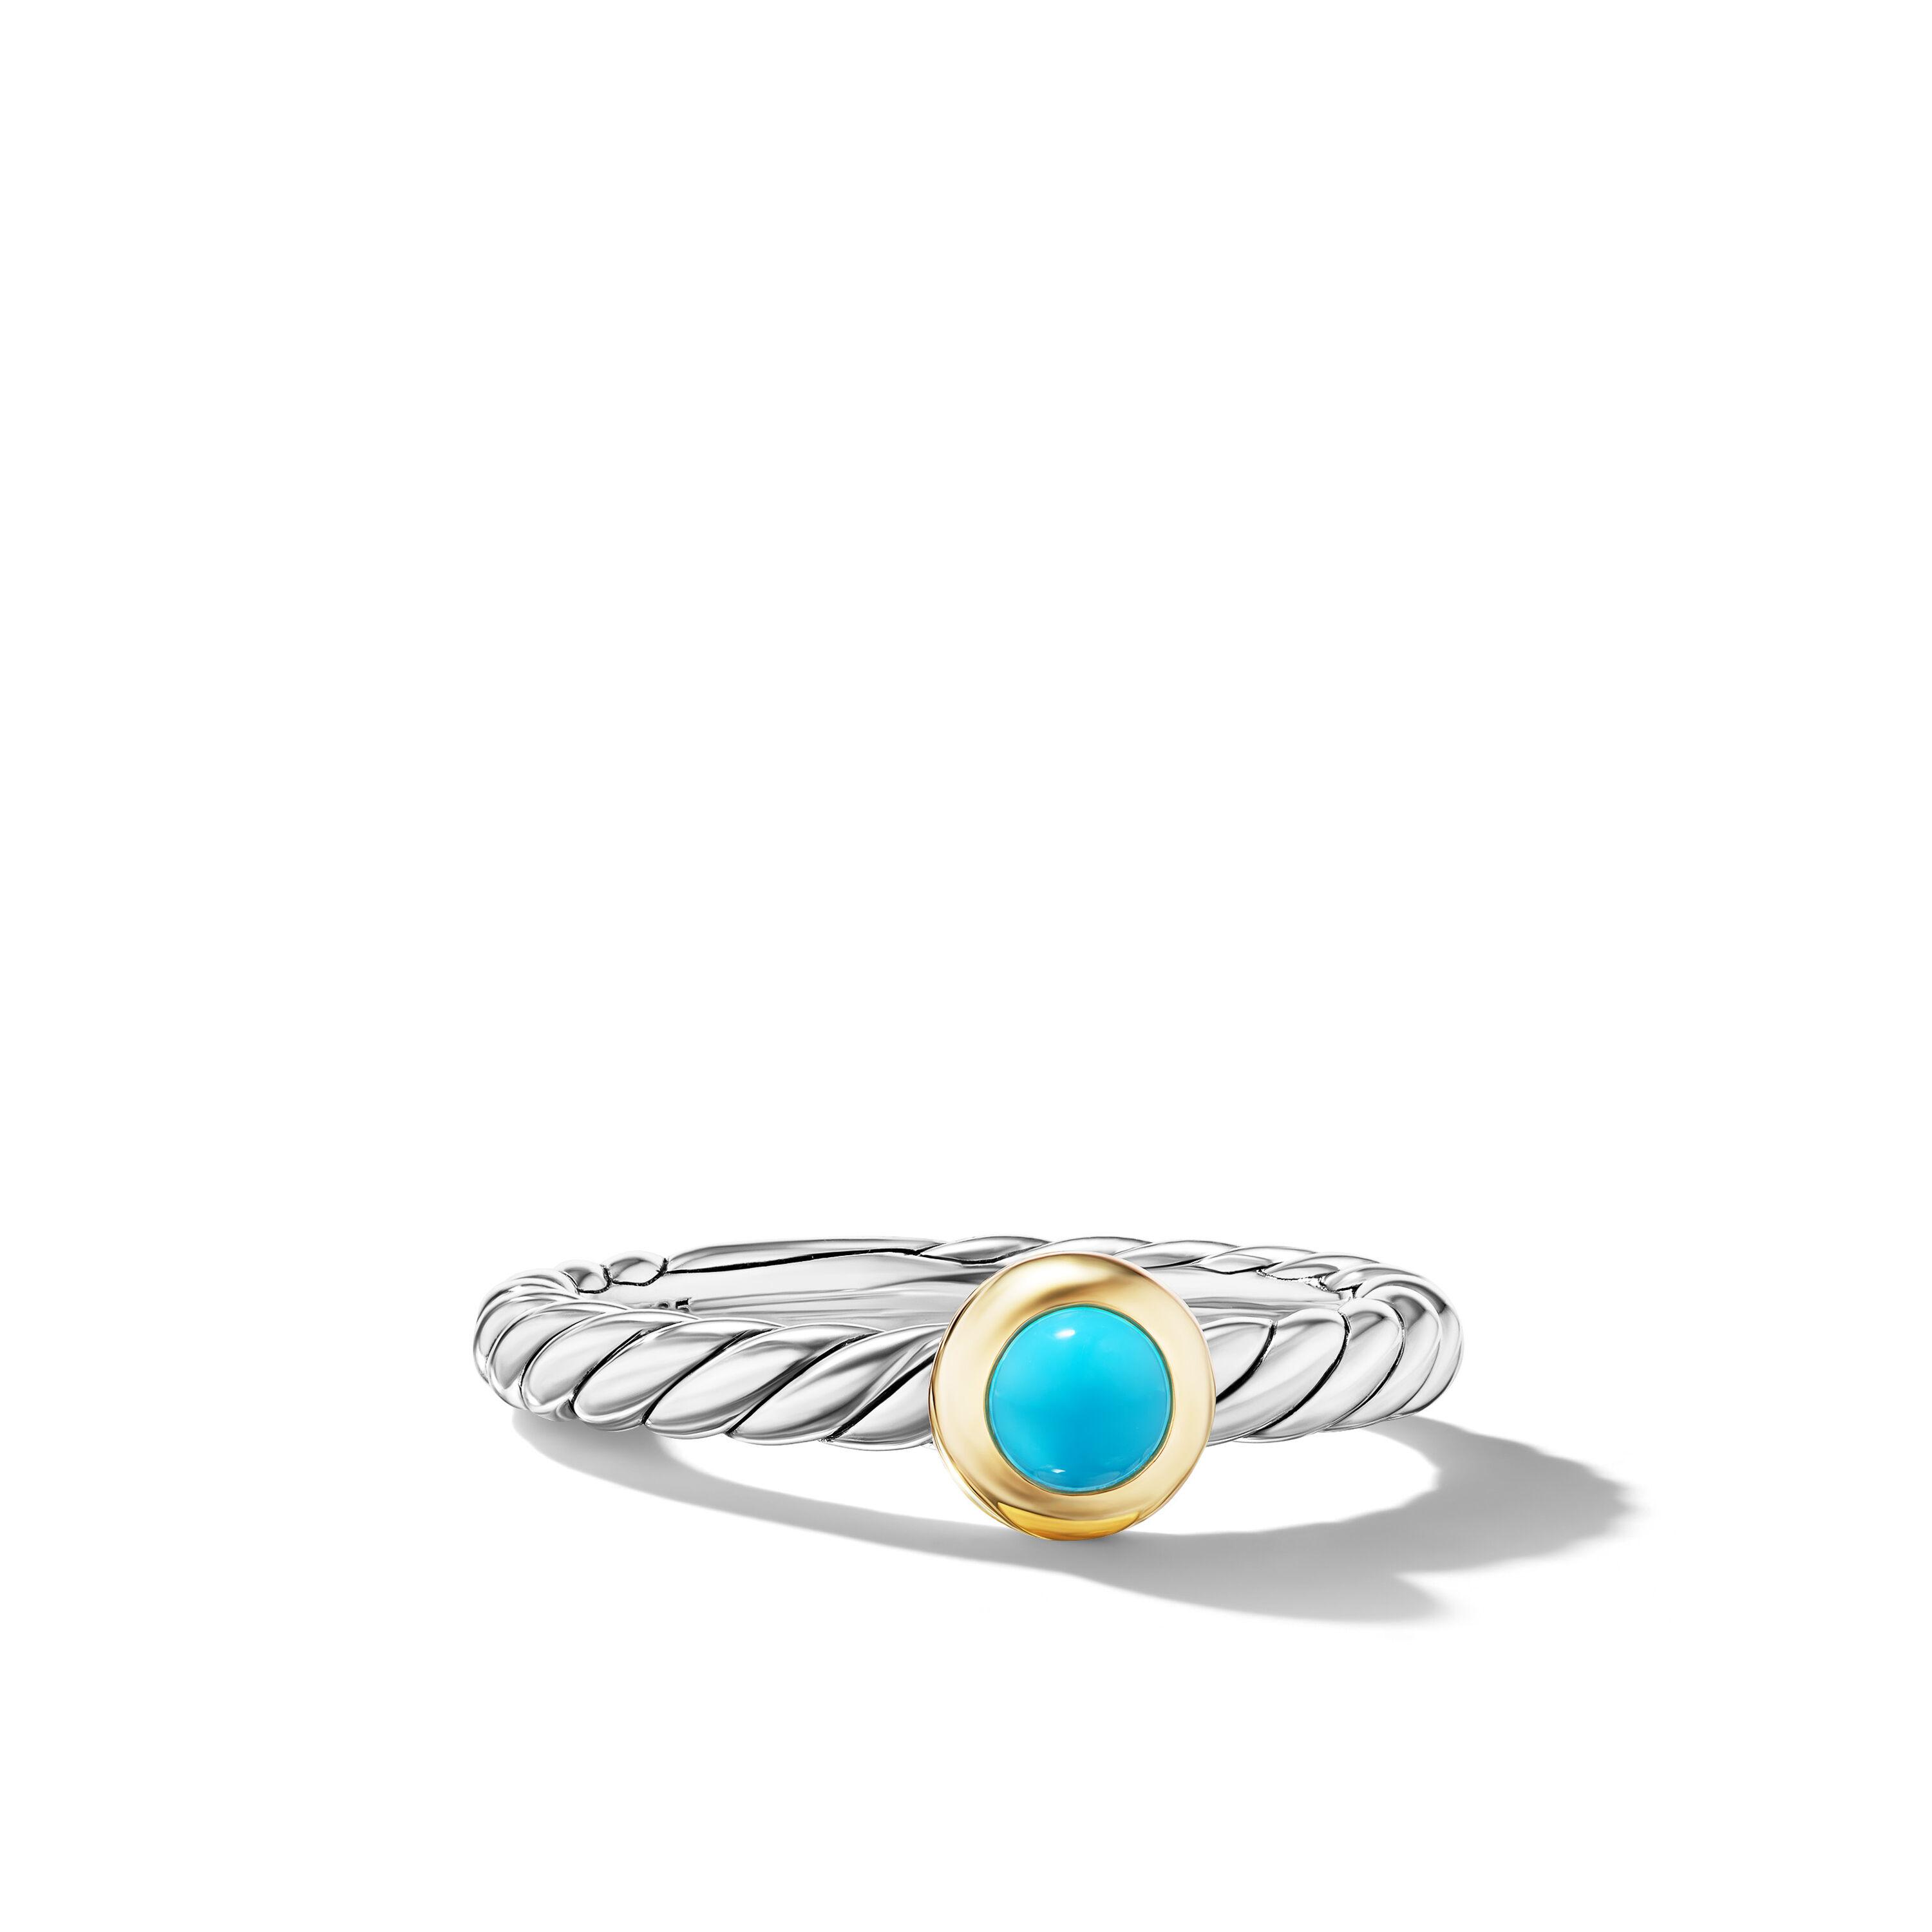 David Yurman Petite Cable Ring in Sterling Silver with 14K Yellow Gold and Turquoise, Size 7